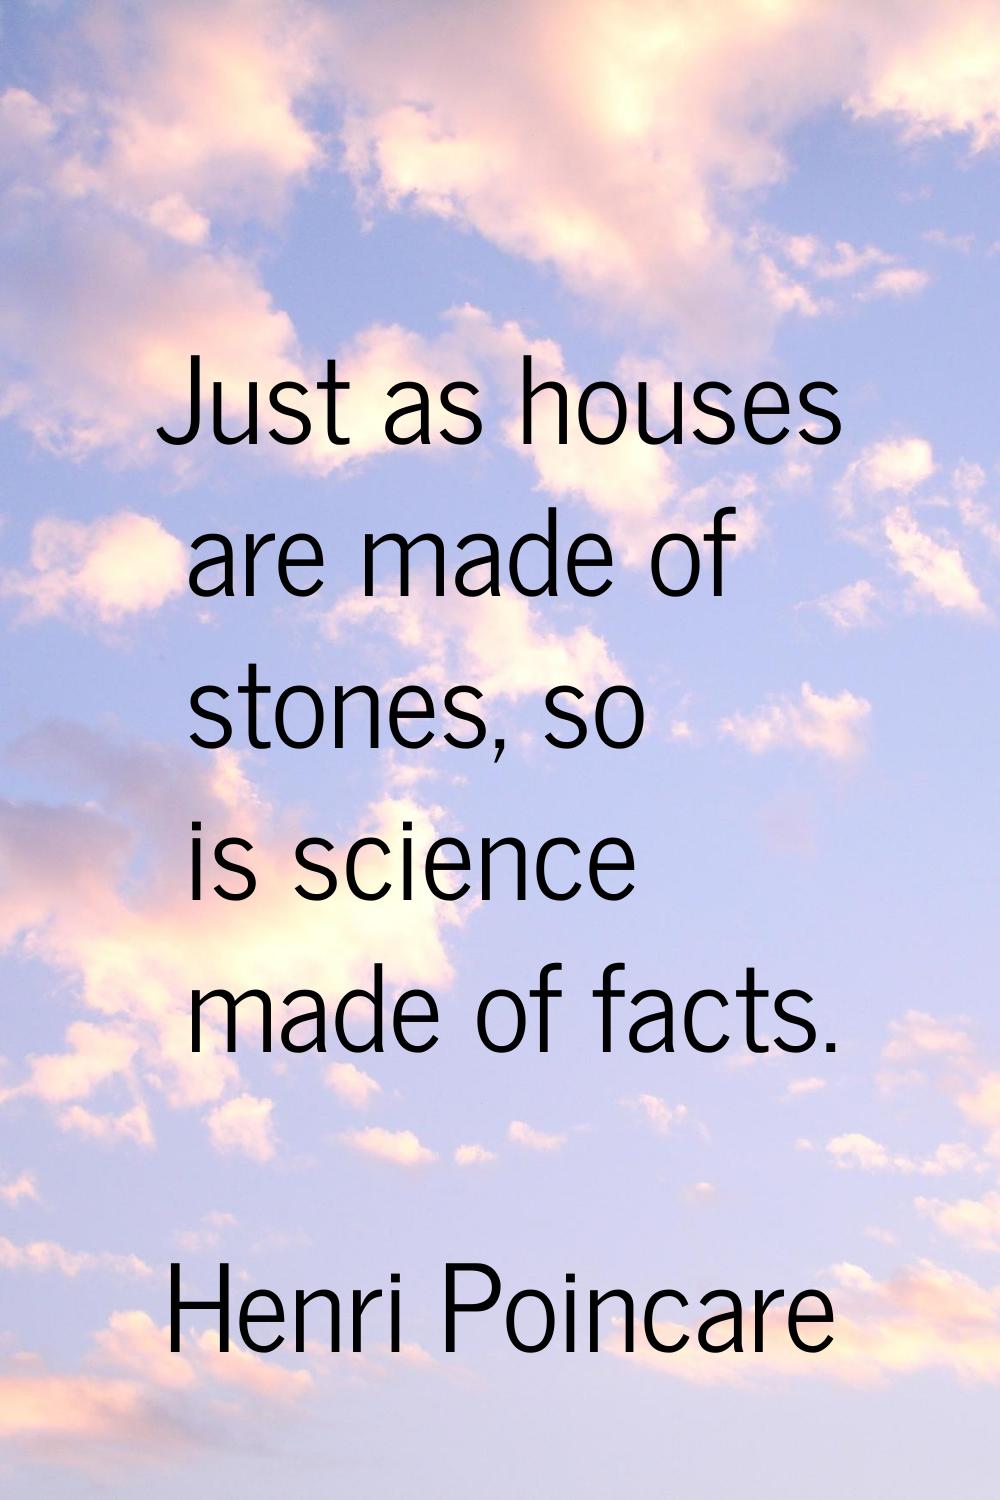 Just as houses are made of stones, so is science made of facts.